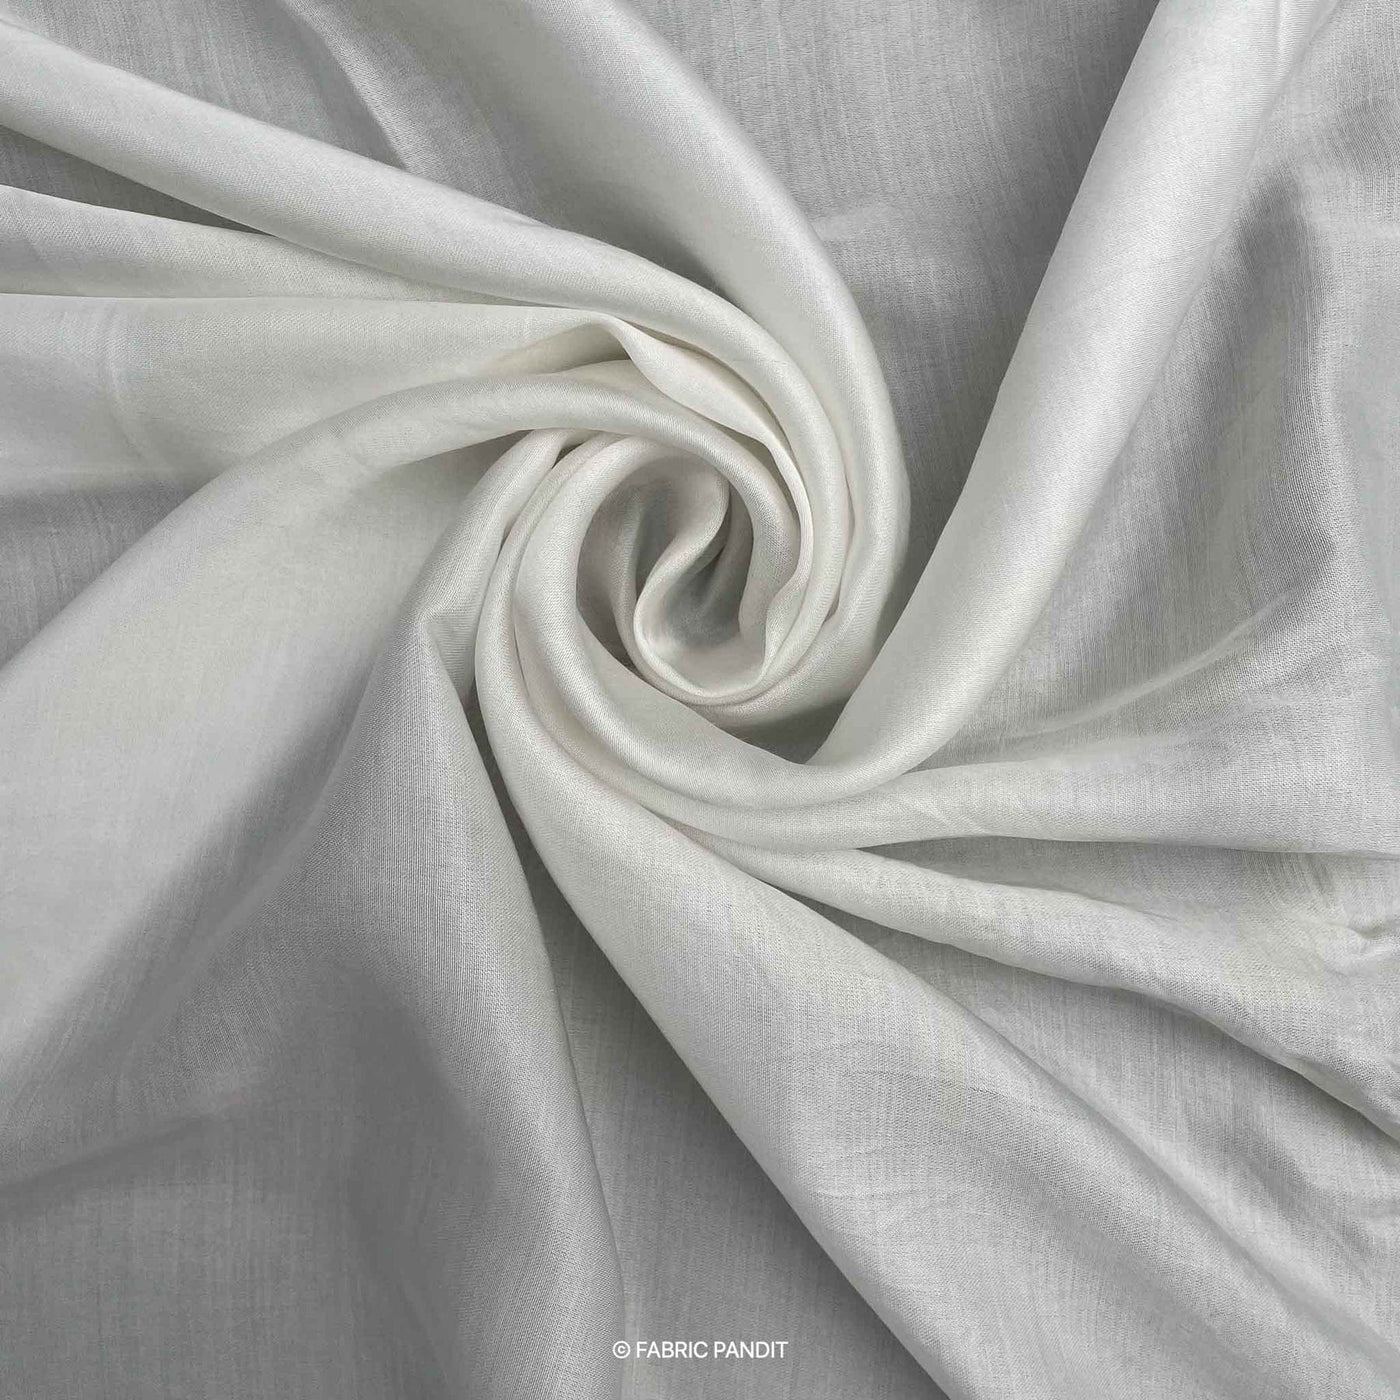 Fabric Pandit Fabric White Dyeable Pure Modal Satin Plain Fabric (Width 44 inches, 100 Gms)